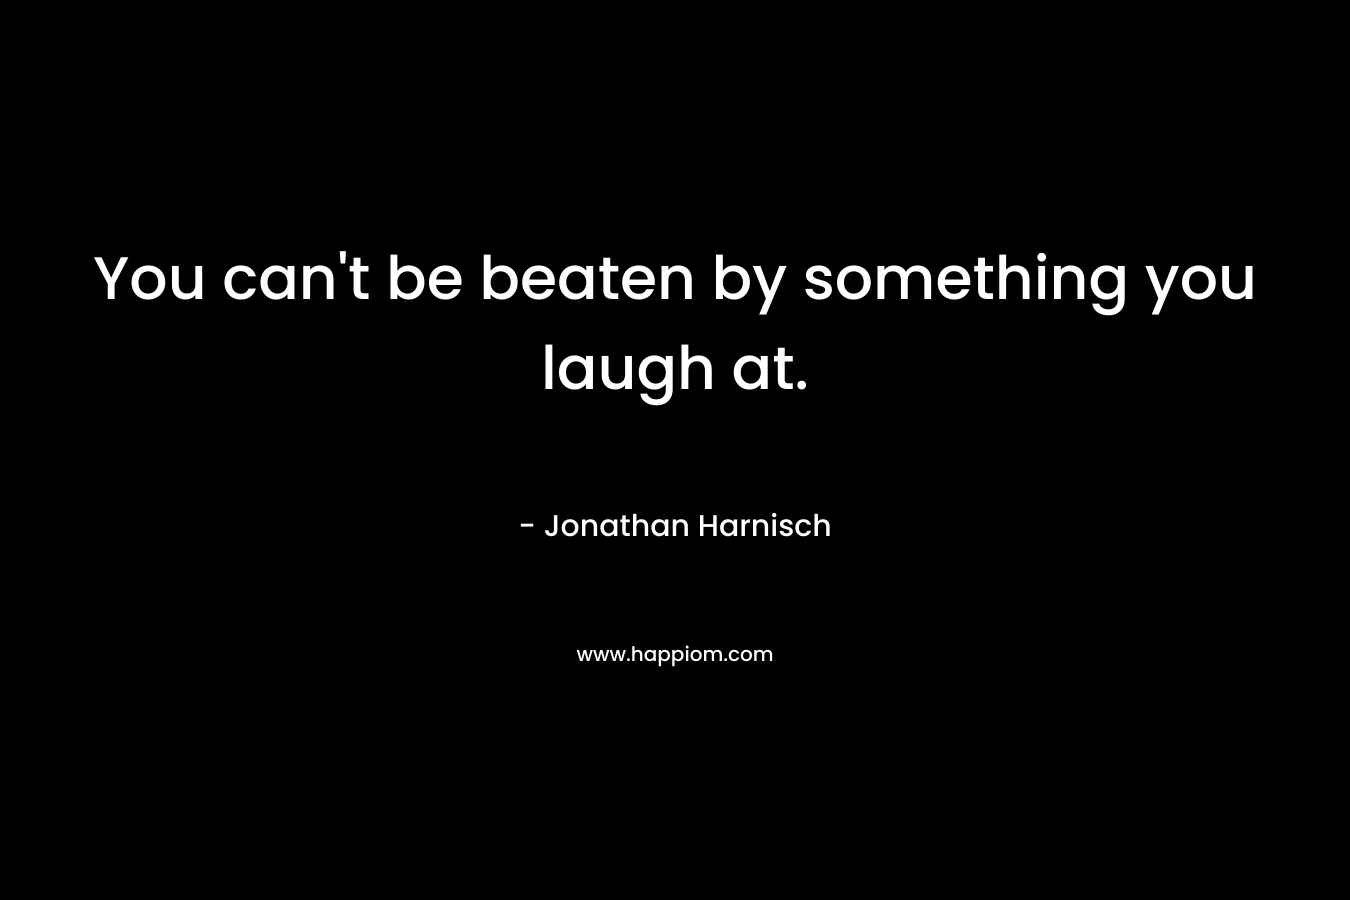 You can’t be beaten by something you laugh at. – Jonathan Harnisch